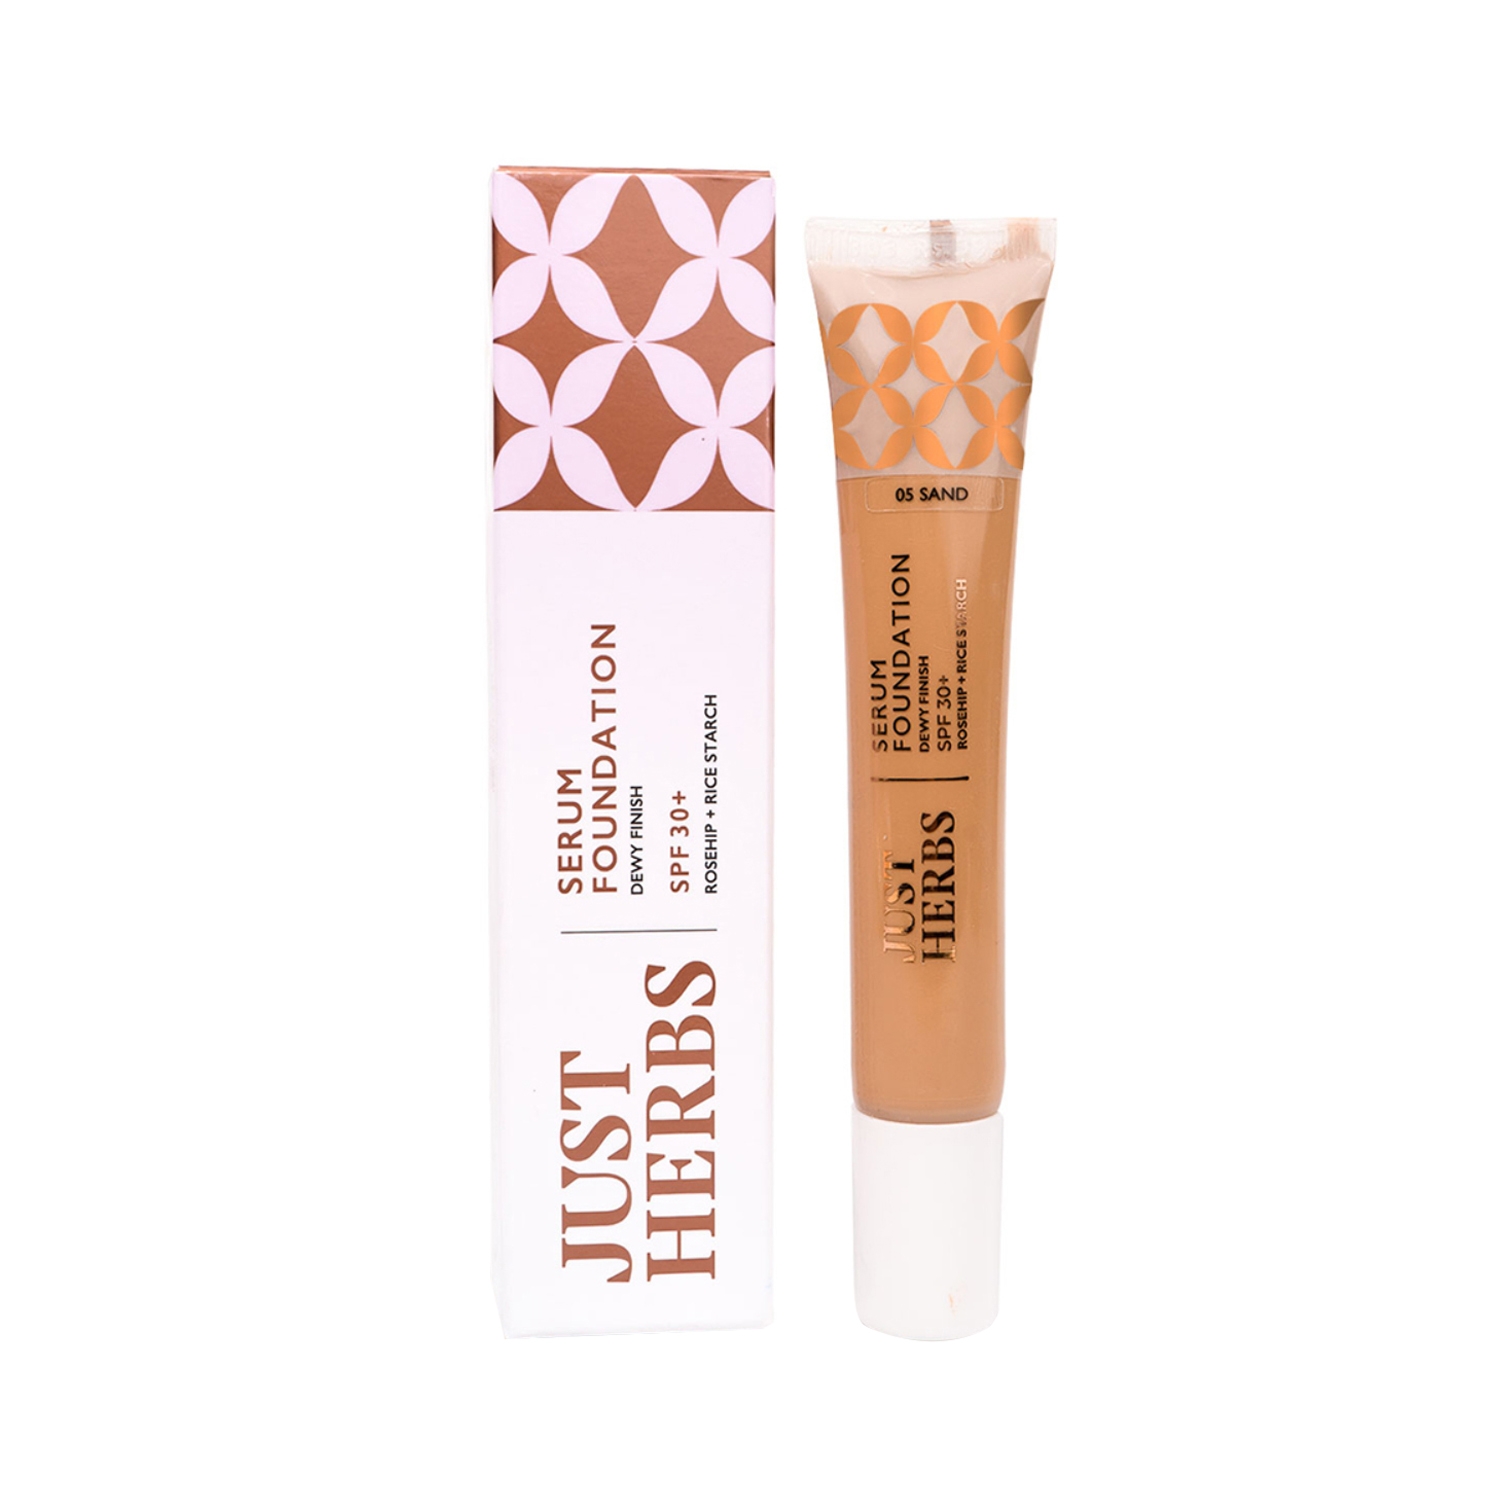 Just Herbs | Just Herbs Serum Foundation Dewy Finish SPF 30+ With Rosehip & Rice Starch - 05 Sand (20ml)